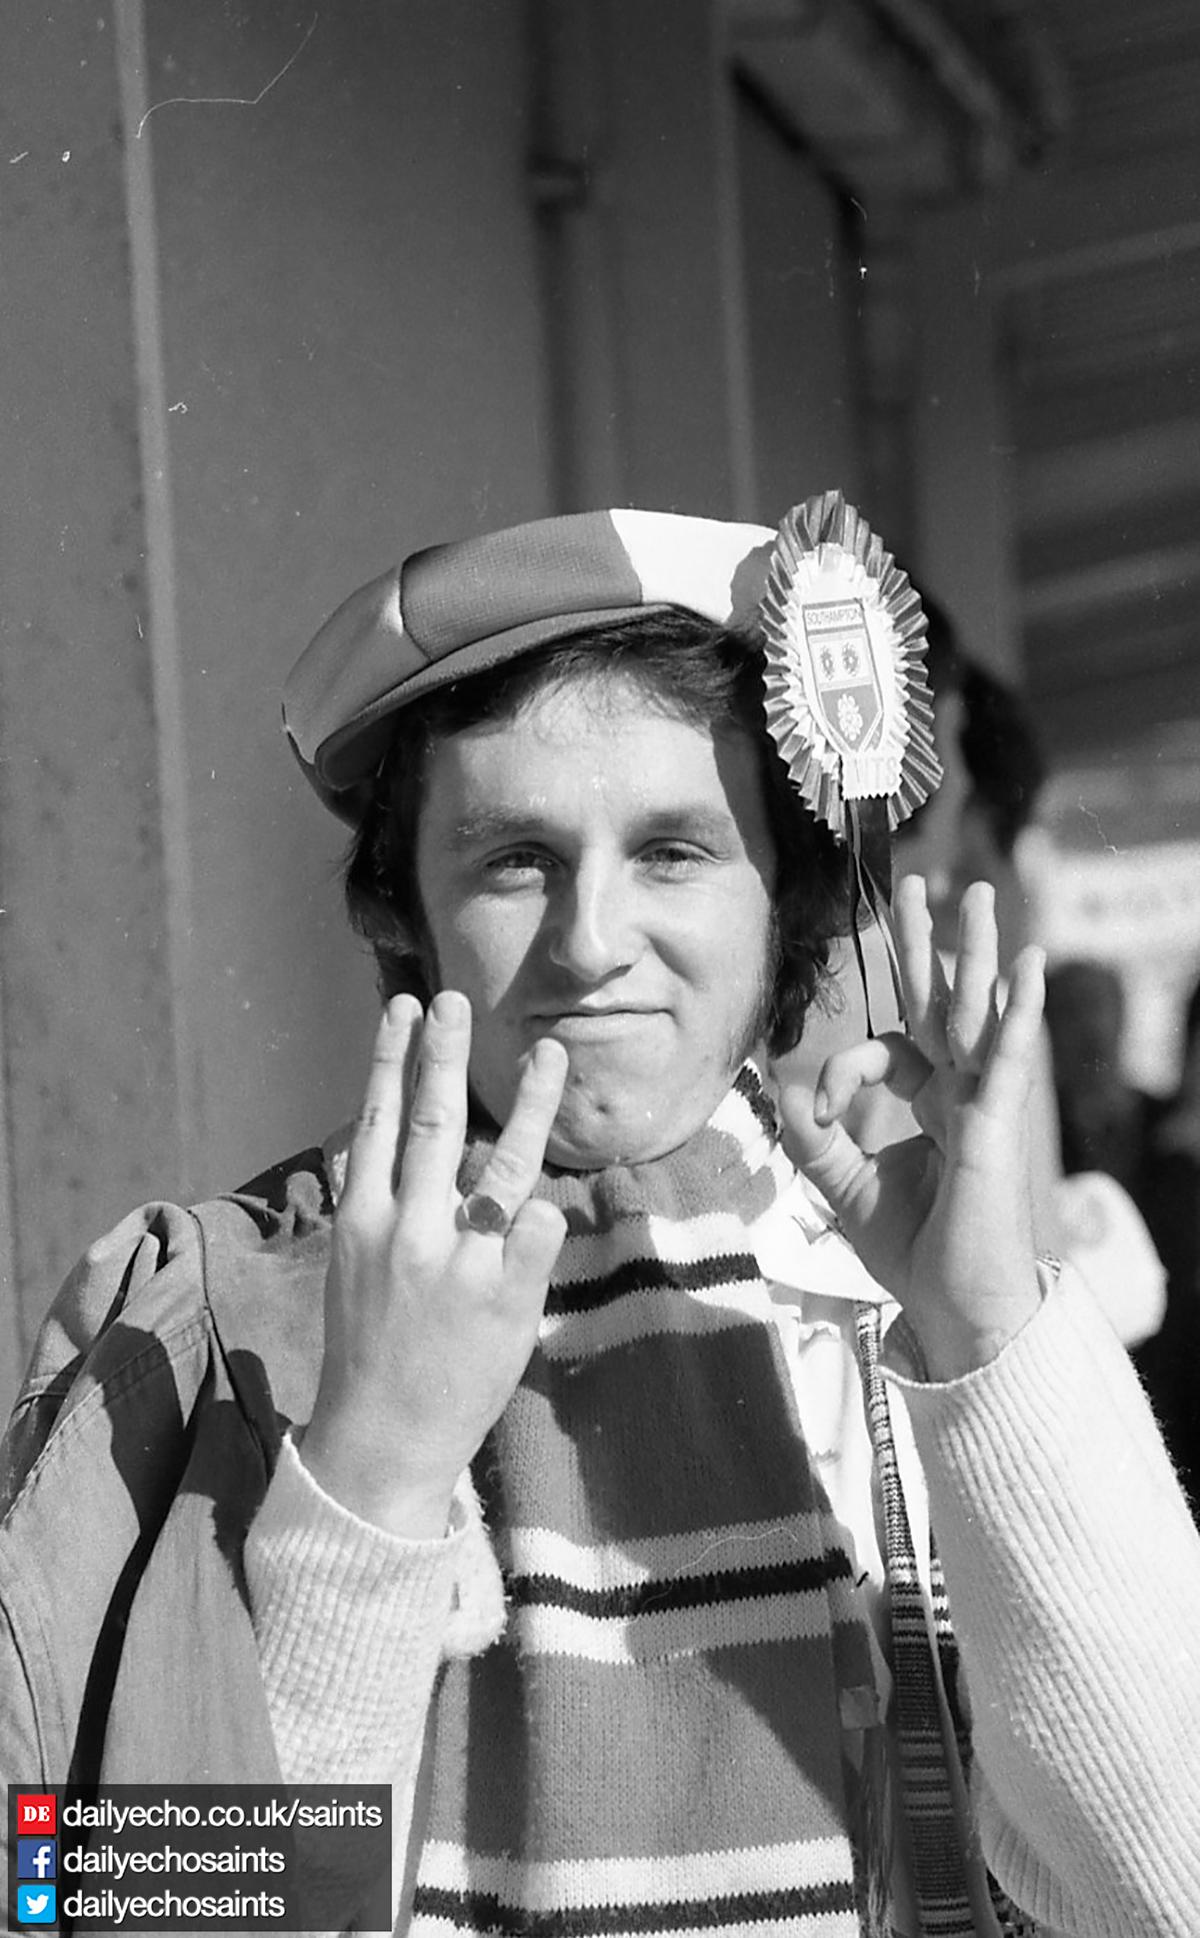 Photographs from Southampton FC's 1976 FA Cup run - A Saints supporter shows his predictions ahead of the semi-final against Crystal Palace.